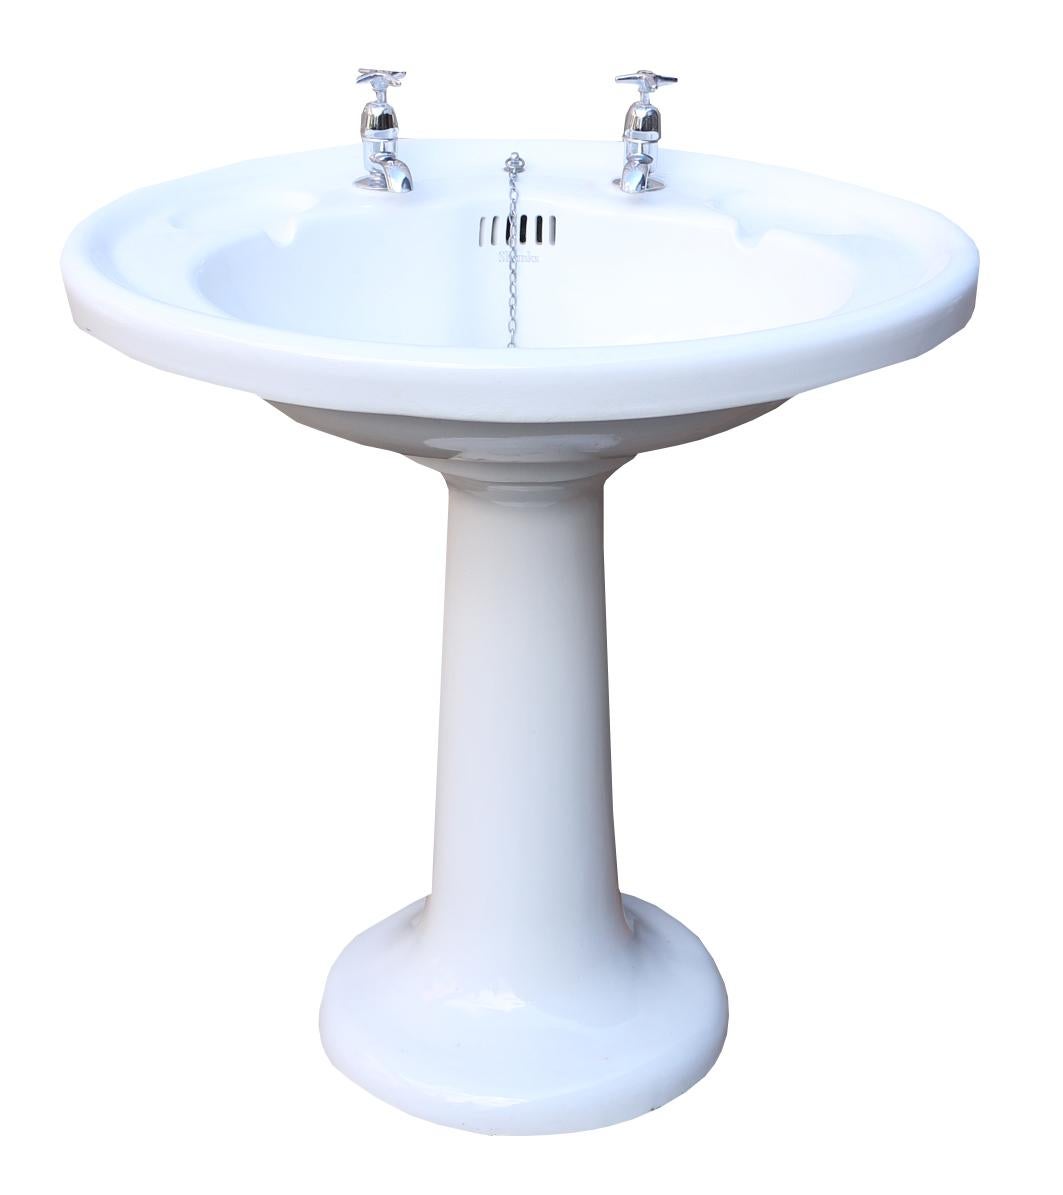 A good condition Art Deco period pedestal basin by Shanks. Reclaimed from a house in Surrey, UK.